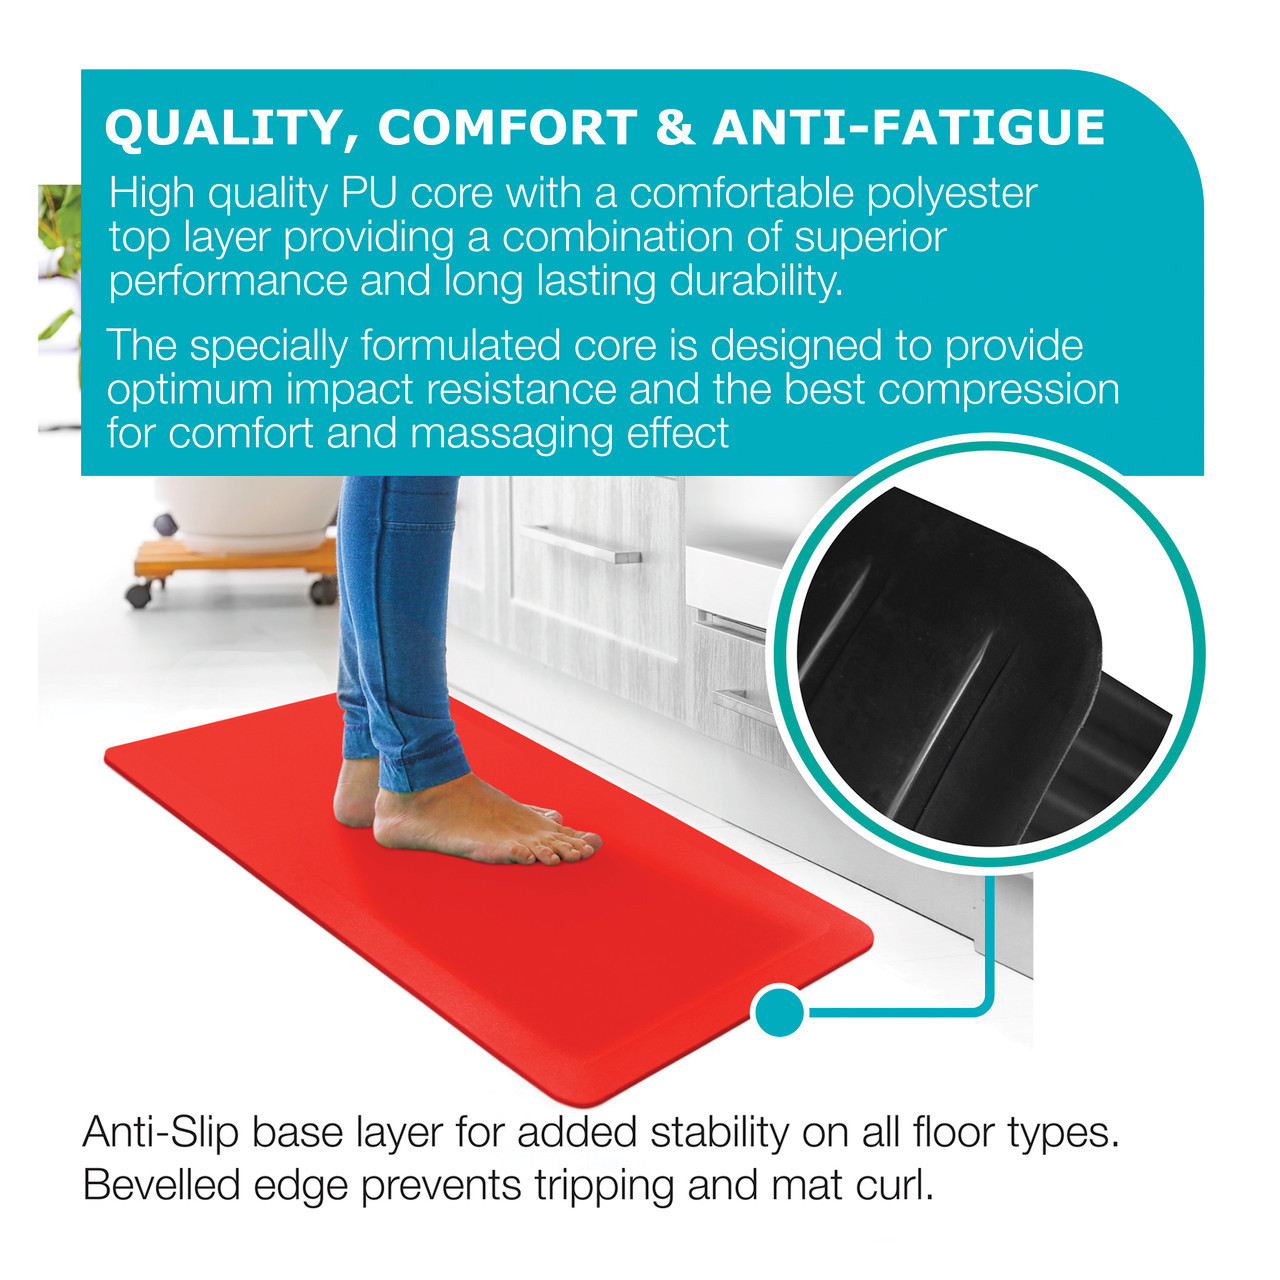 https://cdn11.bigcommerce.com/s-fjwps1jbkv/images/stencil/1280x1280/products/161/3651/ultralux-premium-anti-fatigue-floor-comfort-mat-or-durable-ergonomic-multi-purpose-non-slip-standing-support-pad-or-34-thick-or-red__01936.1688993684.jpg?c=2?imbypass=on